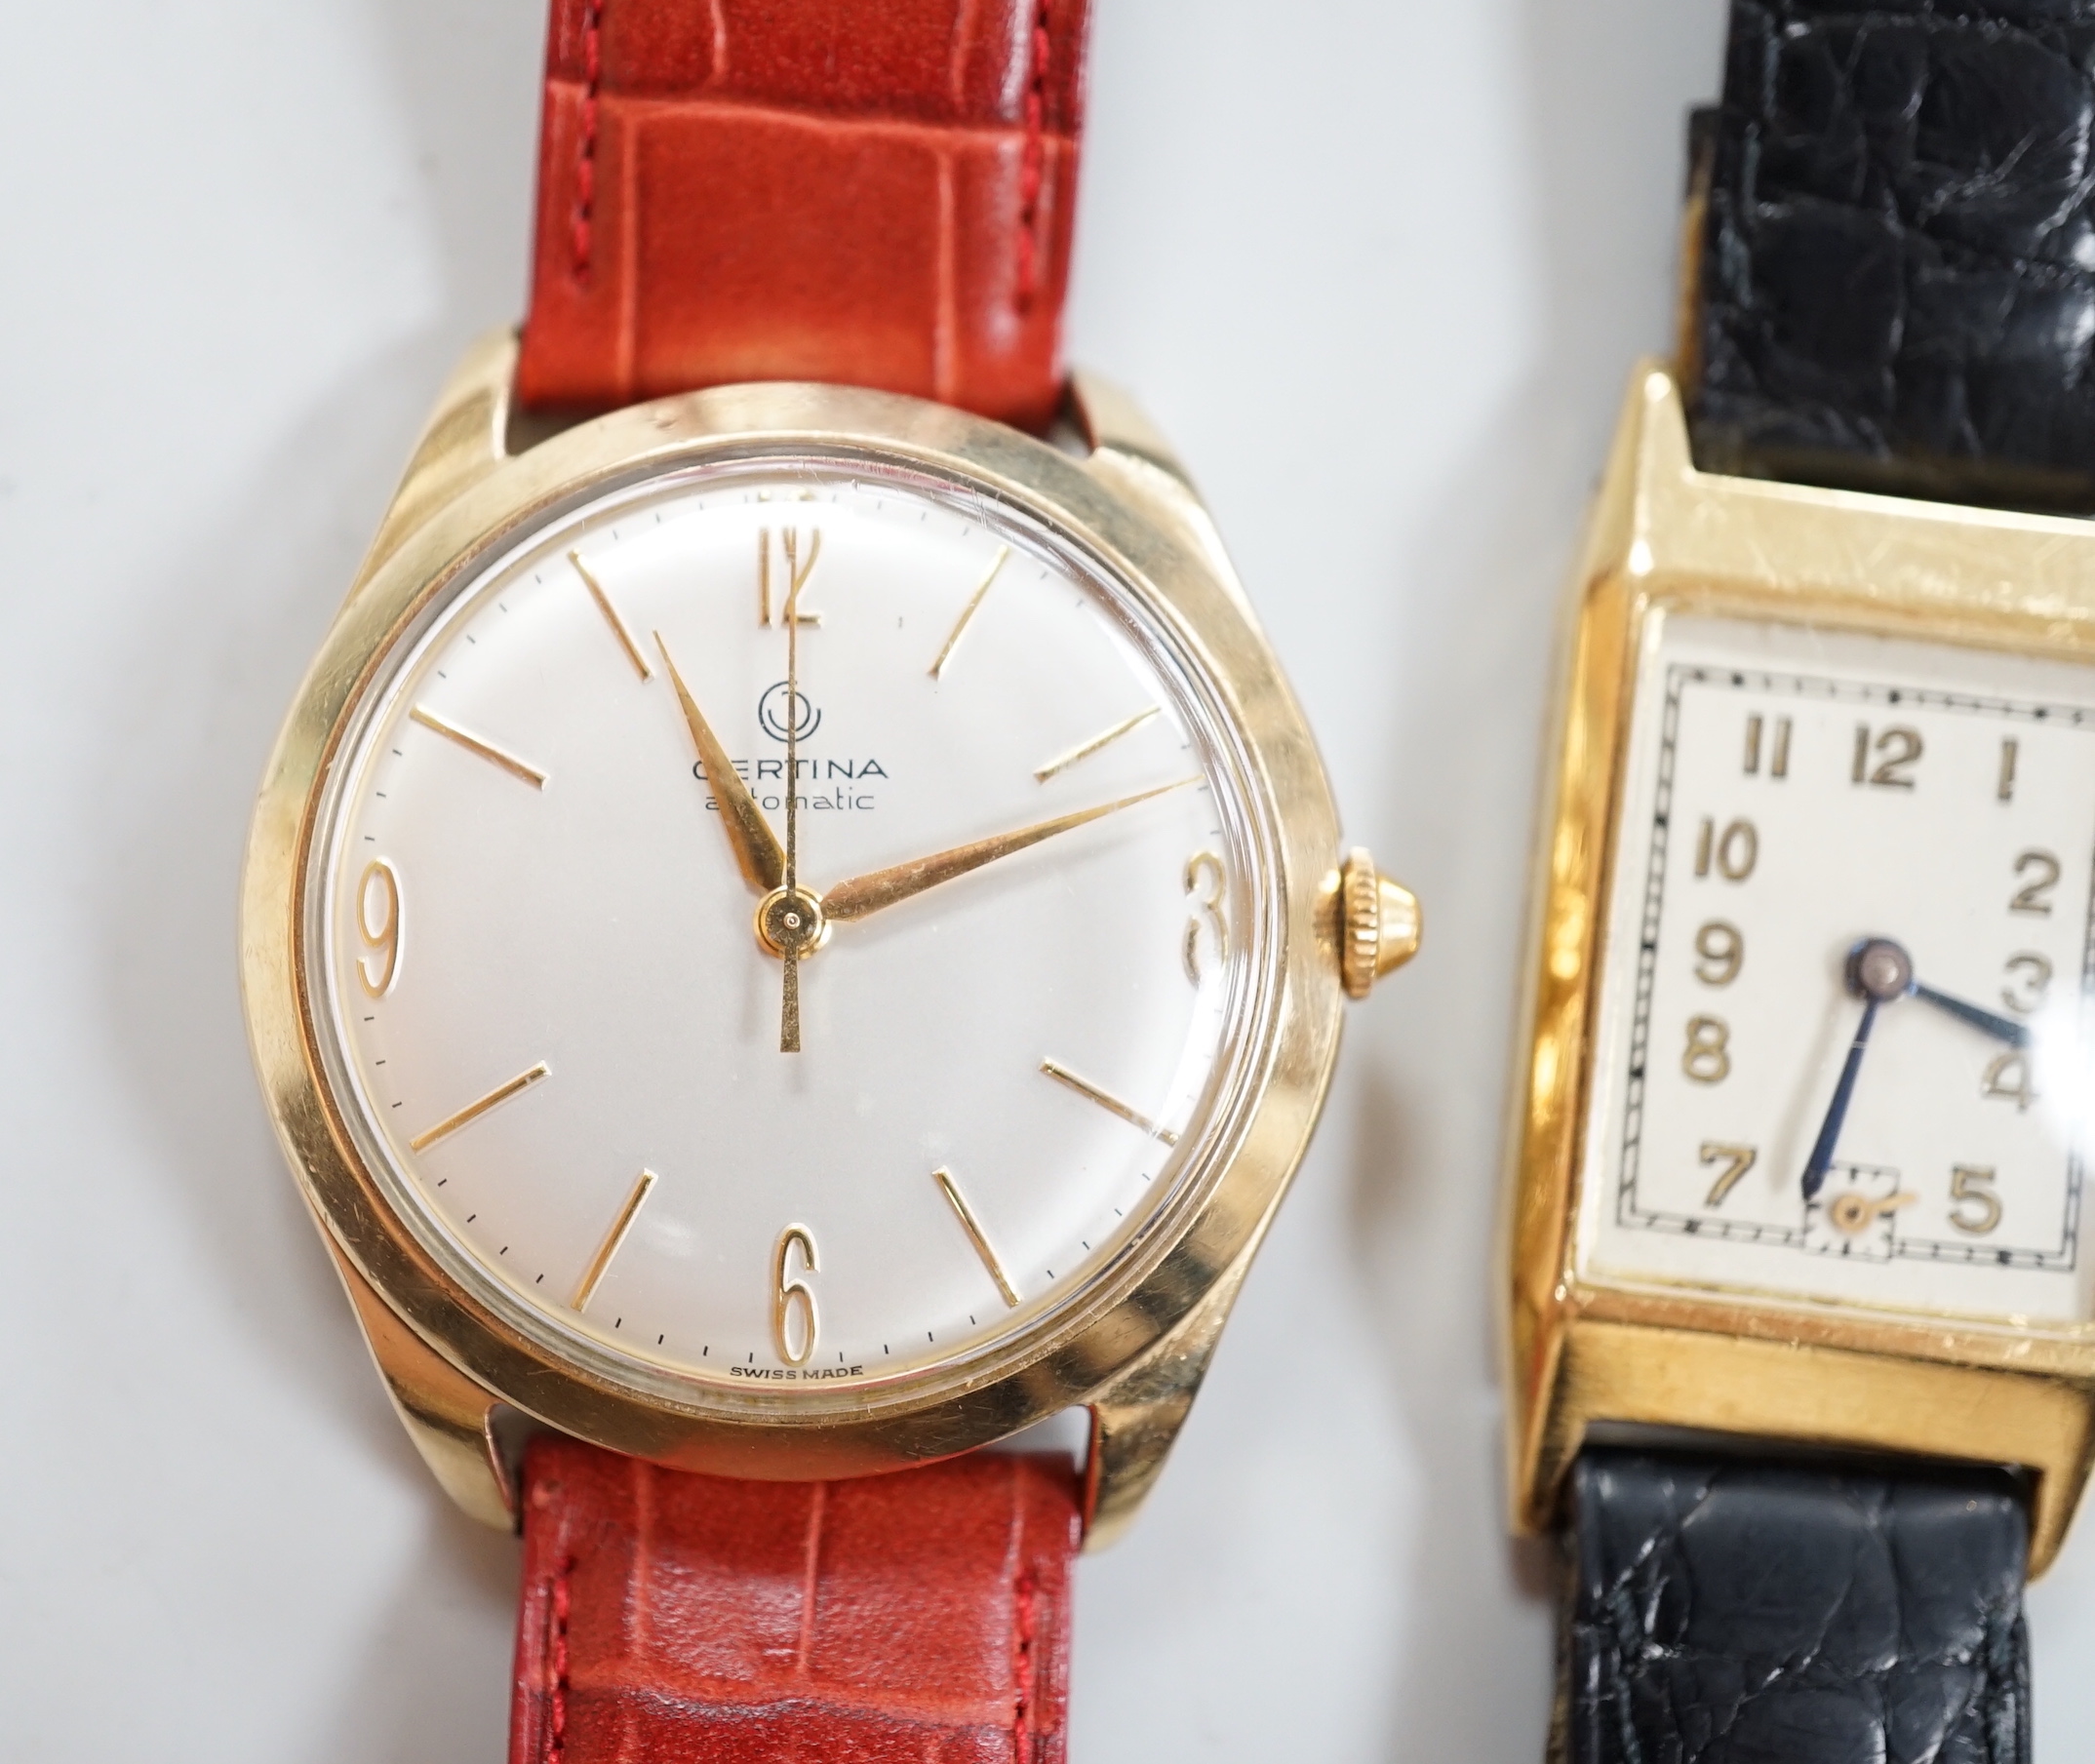 A gentleman's French yellow metal (18ct poincon mark) rectangular manual wind wrist watch, on a leather strap, together with a gentleman's 9ct gold Certina automatic wrist watch.